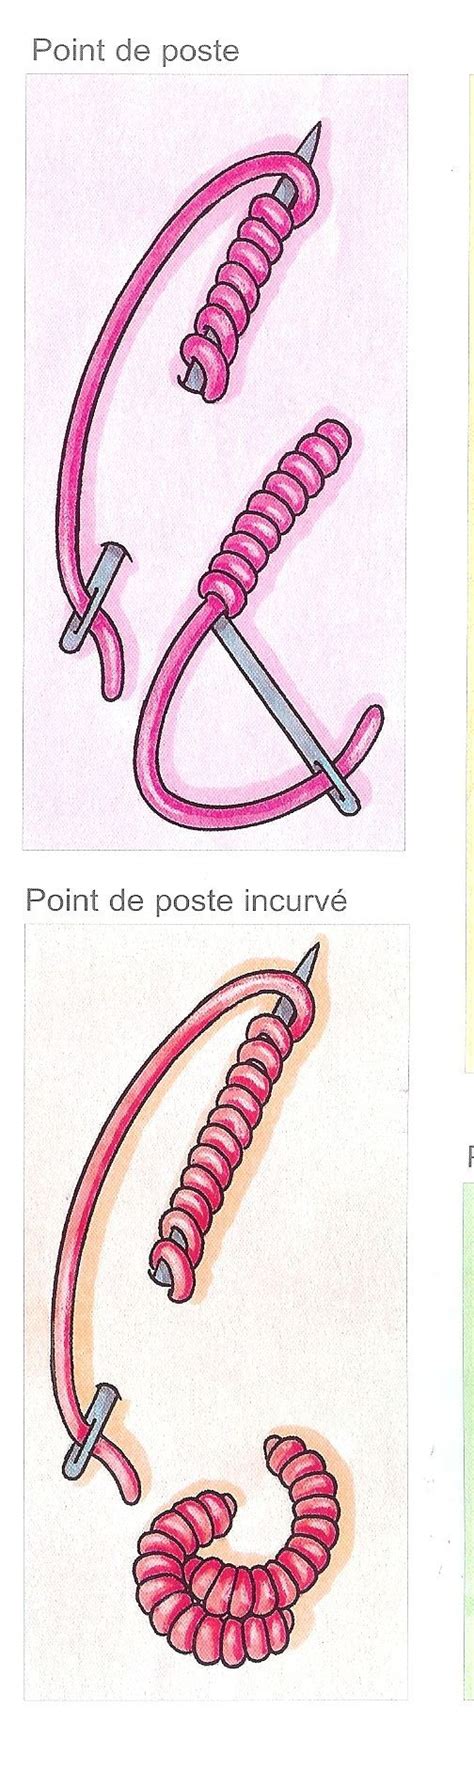 point de poste embroidery tutorials ribbon embroidery embroidery